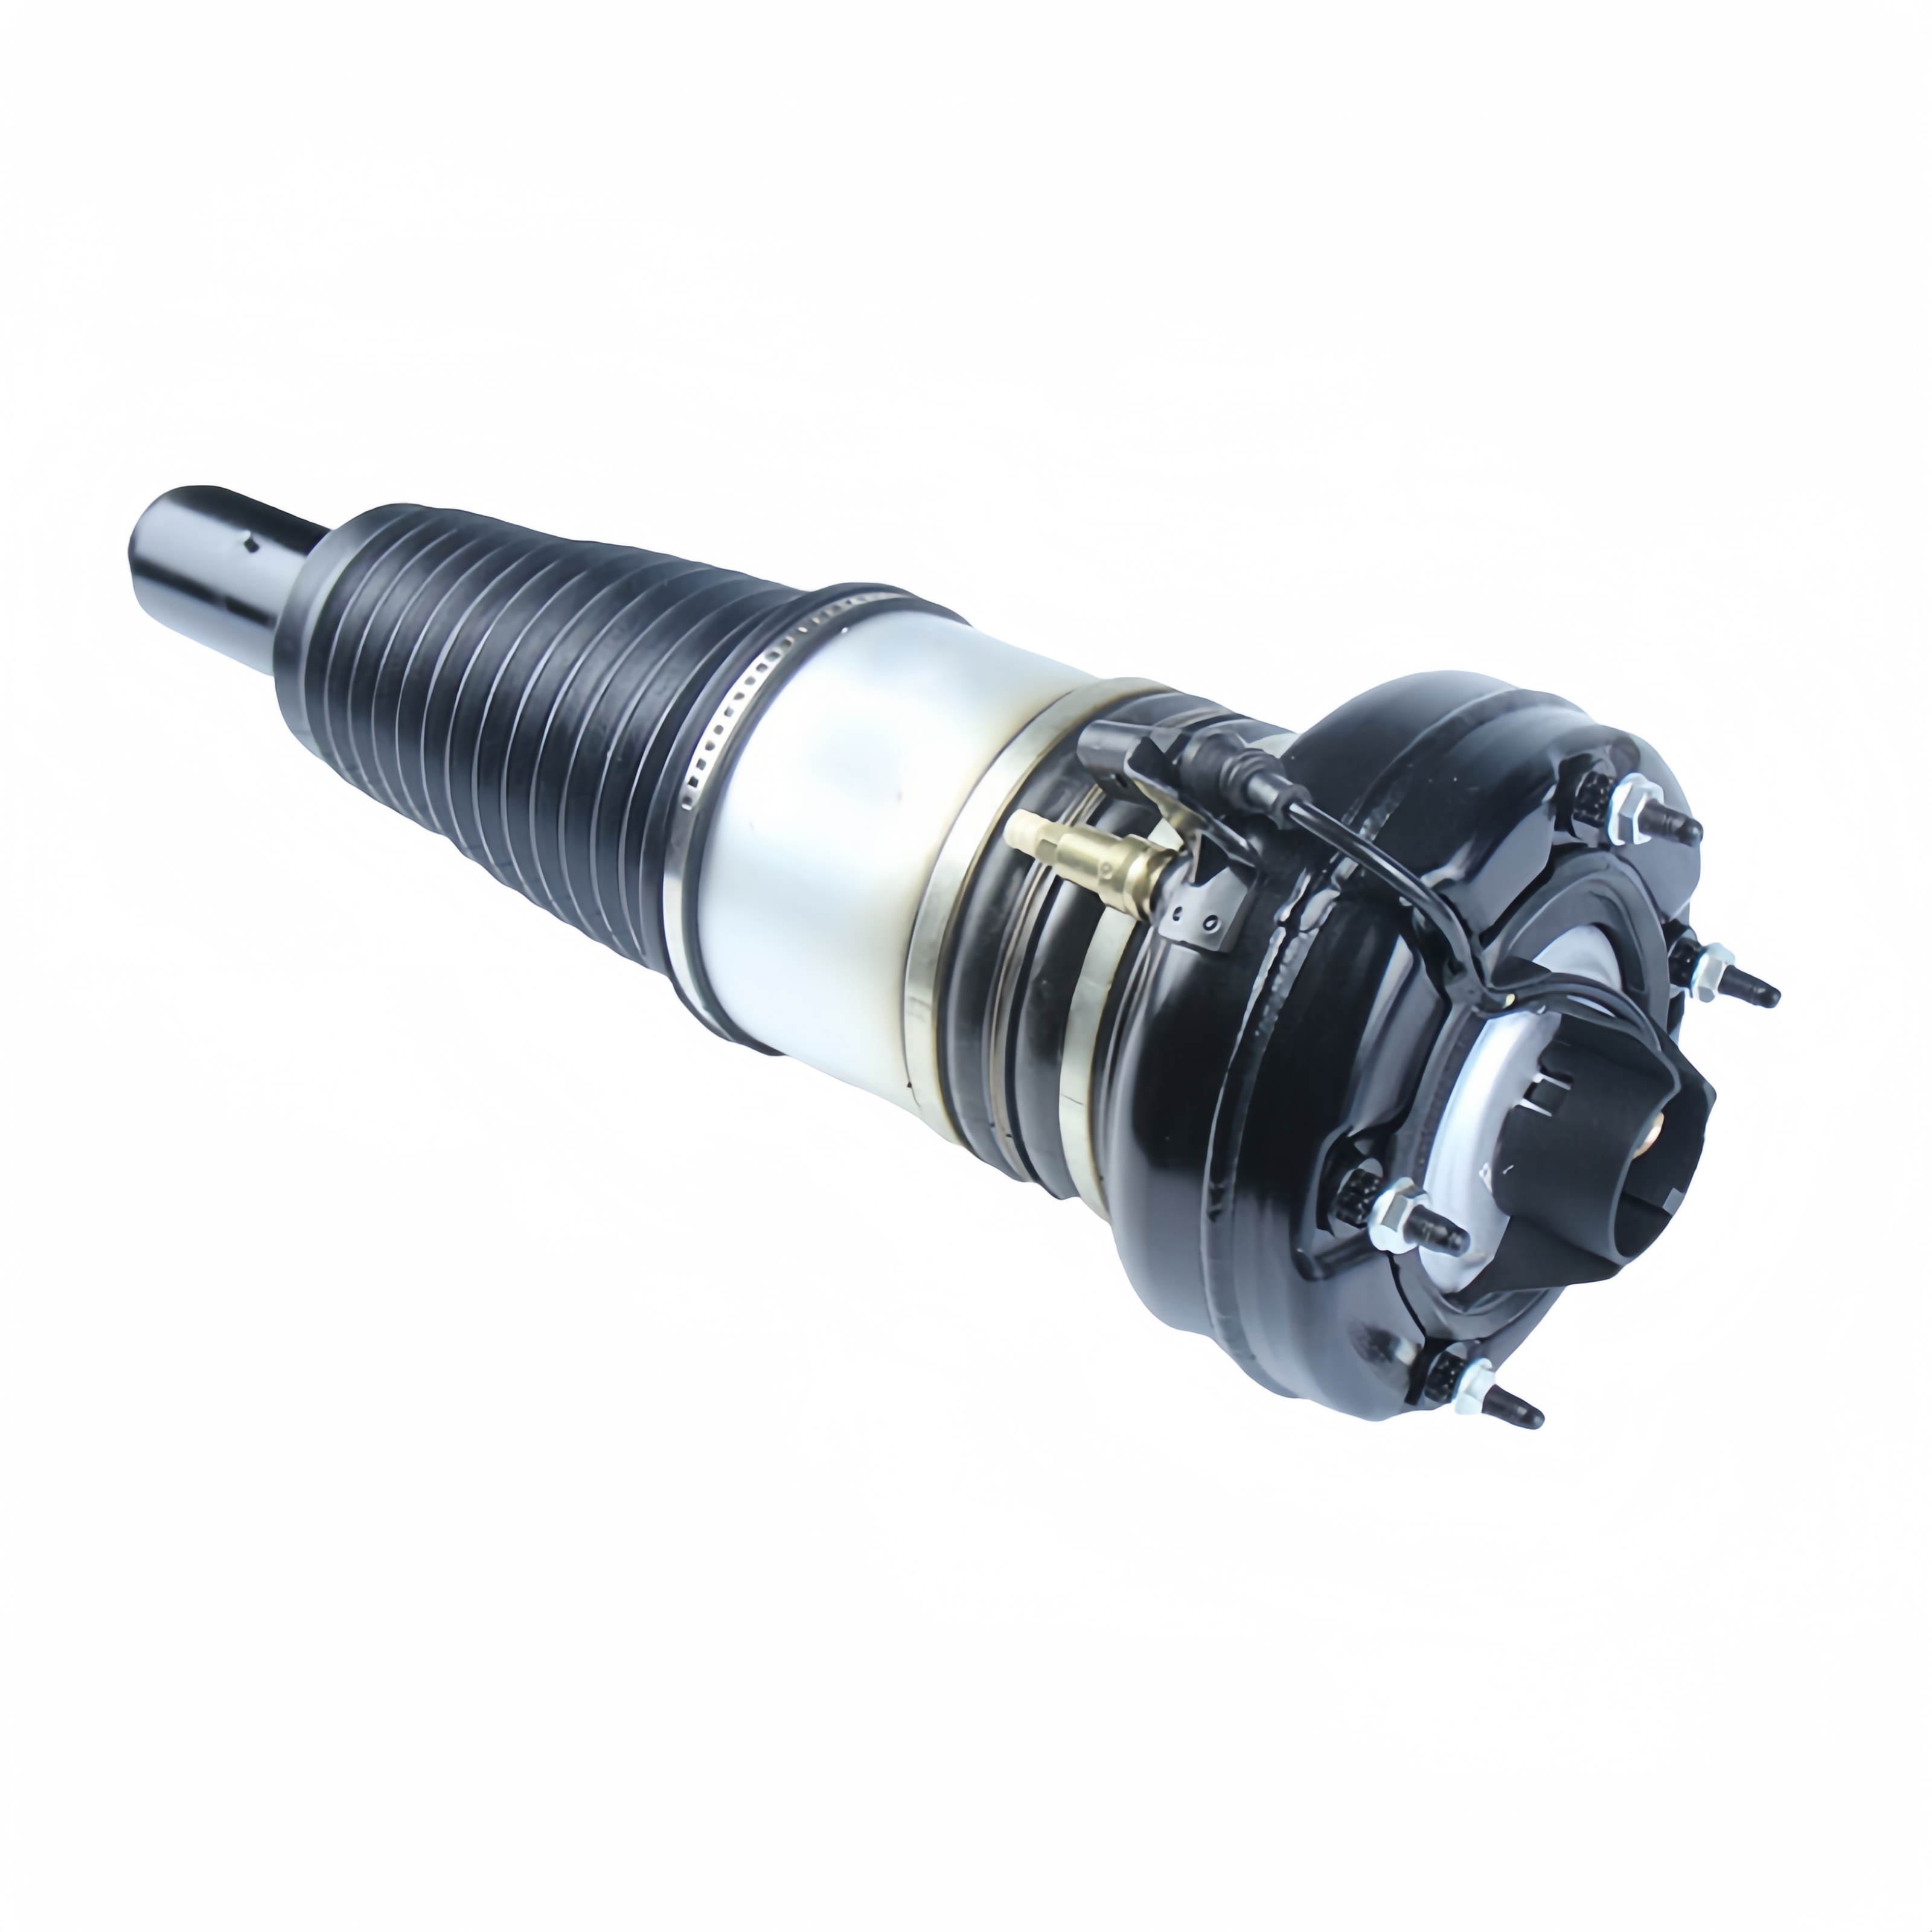 TITD Air Suspension Front Air Suspension Shock Absorber For AUDI A6/A7 2011-2016 OE No. 4H0616039